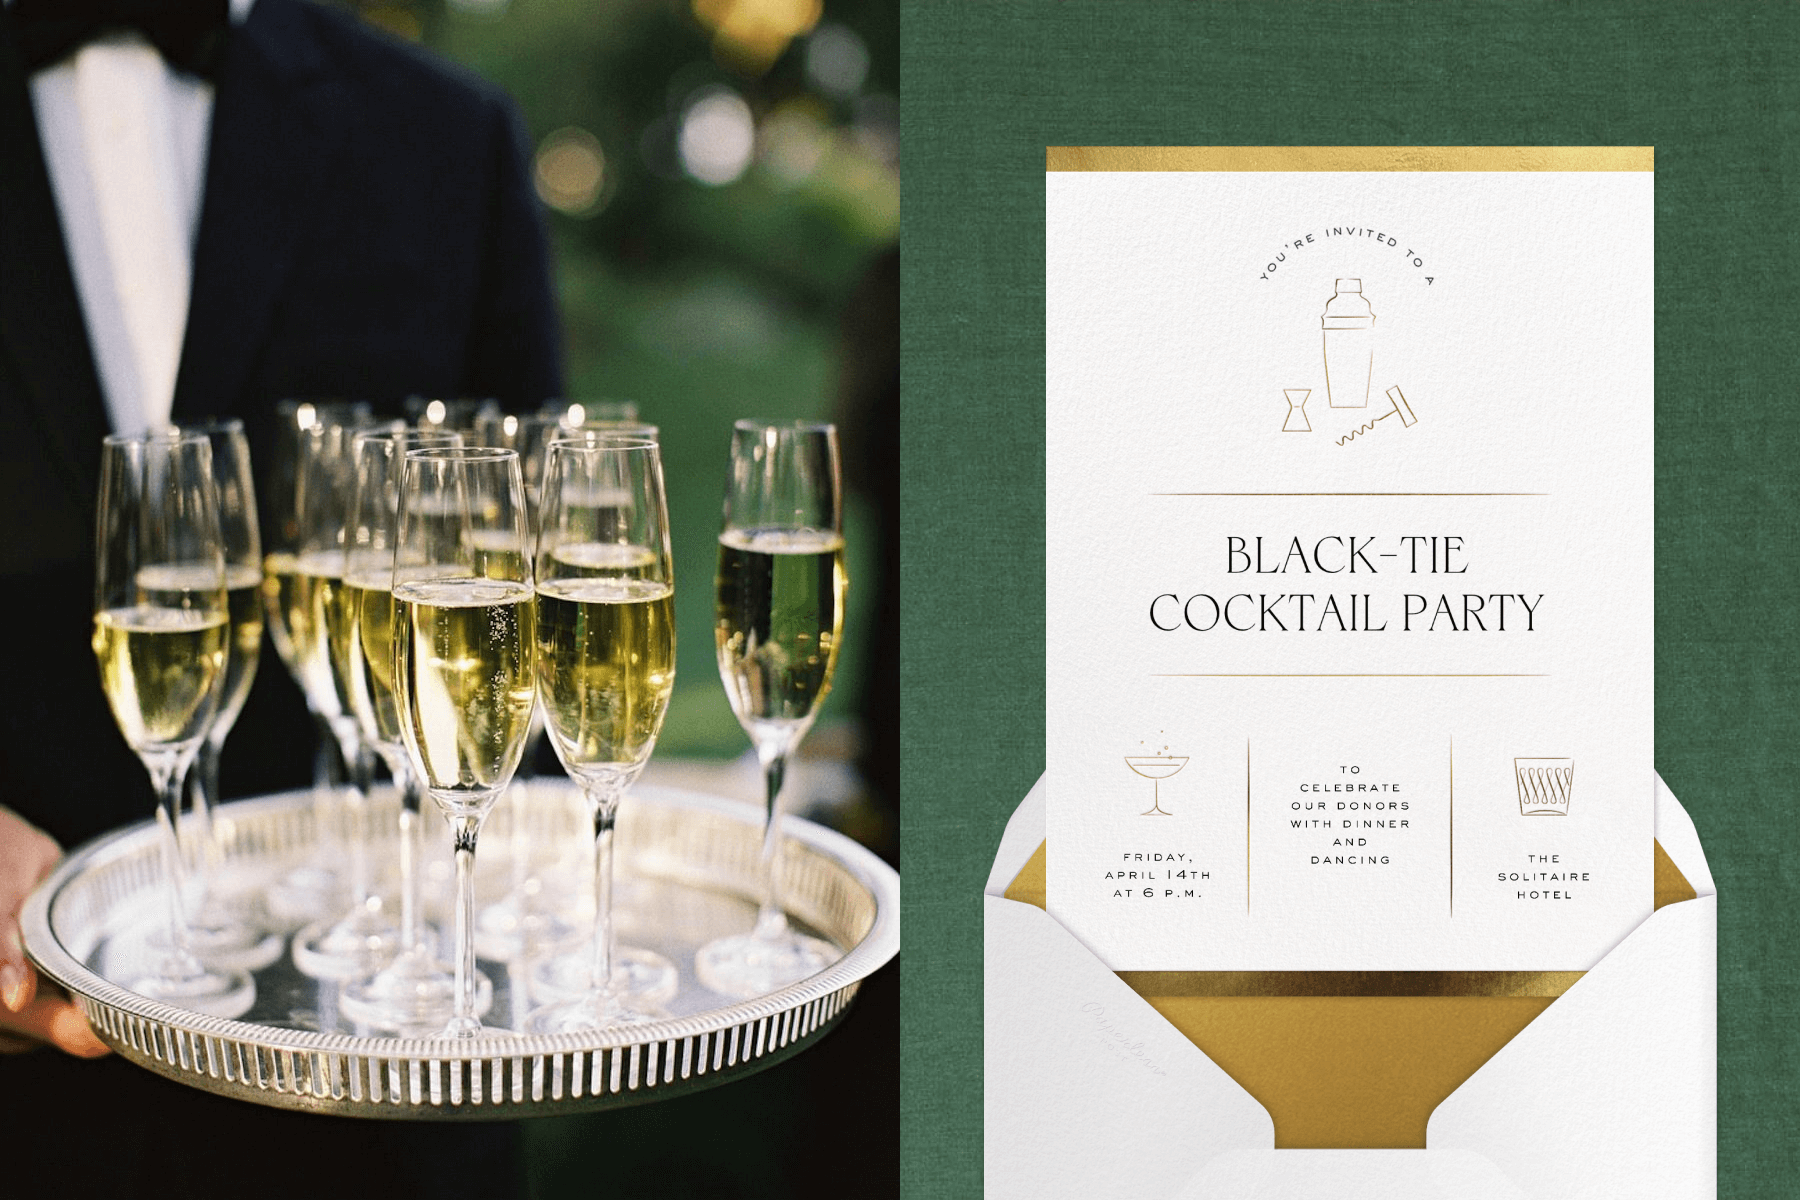 Left: Glasses of champagne are being served on a silver tray. Right: A white invitation with a gold border and matching envelope line and reads “black-tie cocktail party” and features illustrations of bar tools and cocktail glasses.